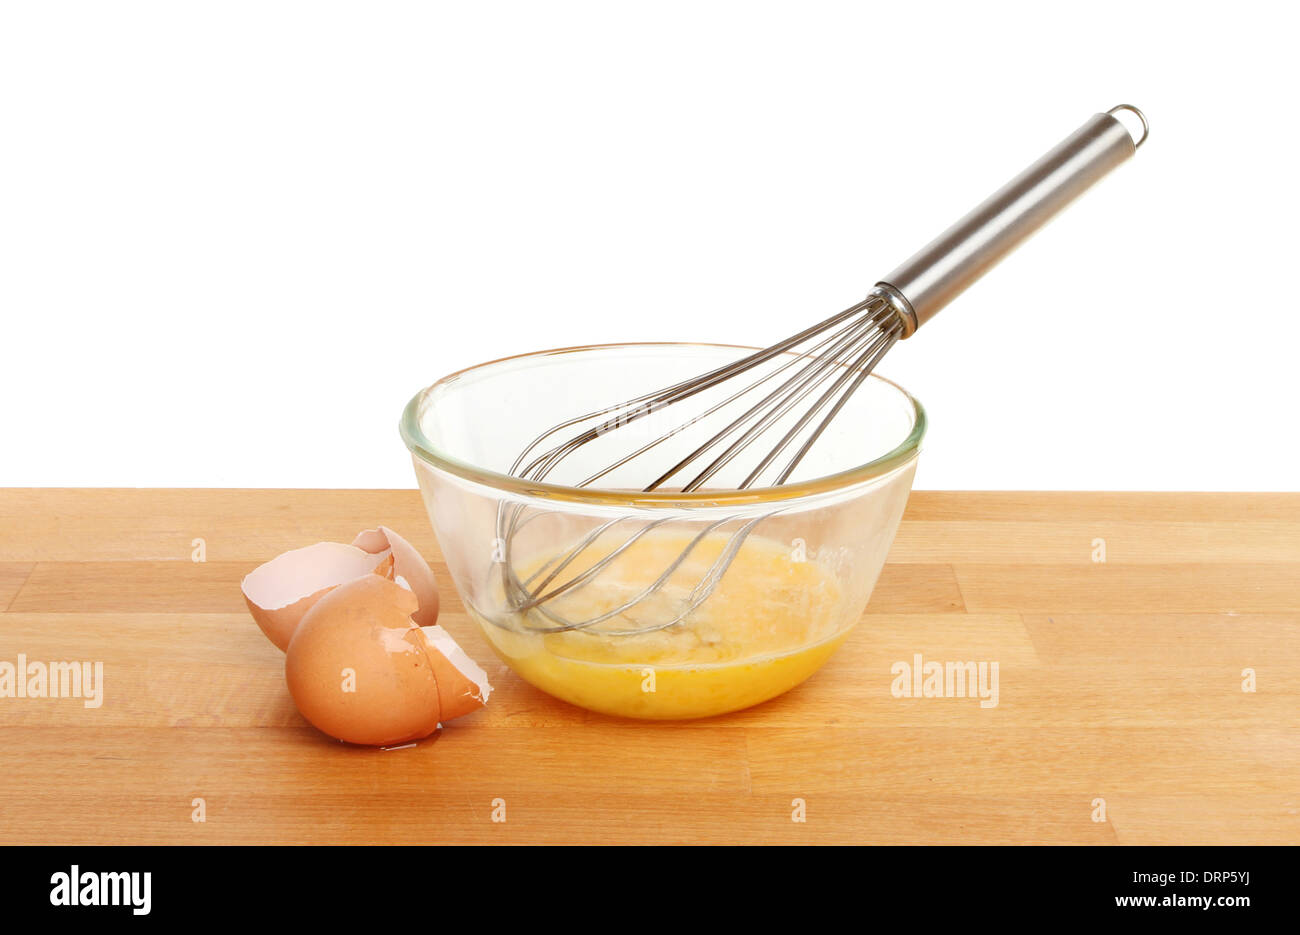 Cracked eggs with a whisk in a glass mixing bowl on a kitchen worktop against a white background Stock Photo